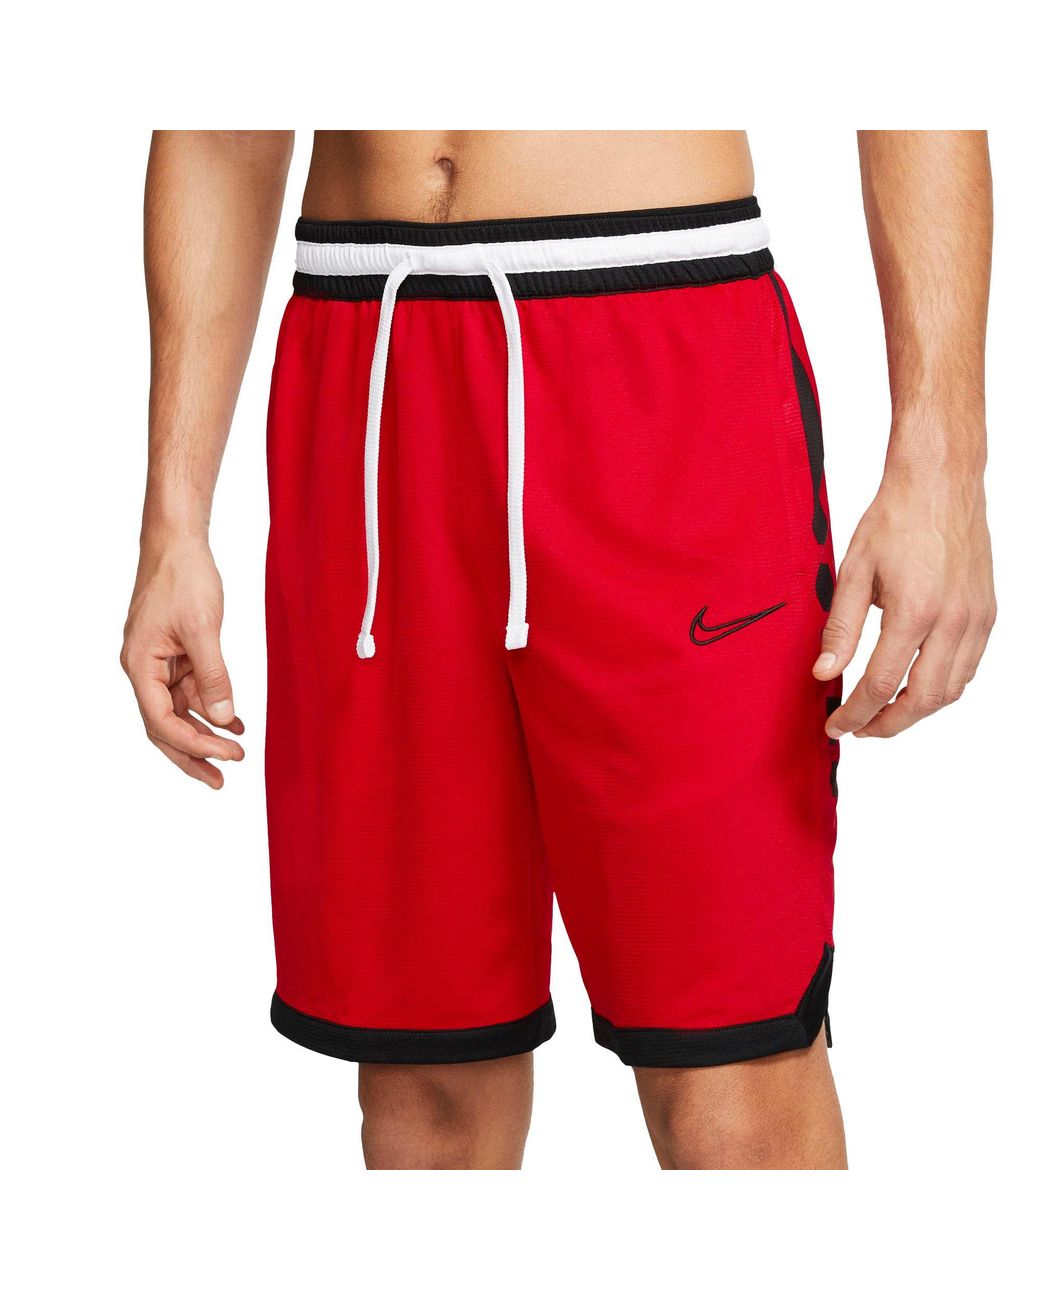 Nike Dri-fit Elite Basketball Shorts in University Red/Black (Red) for ...